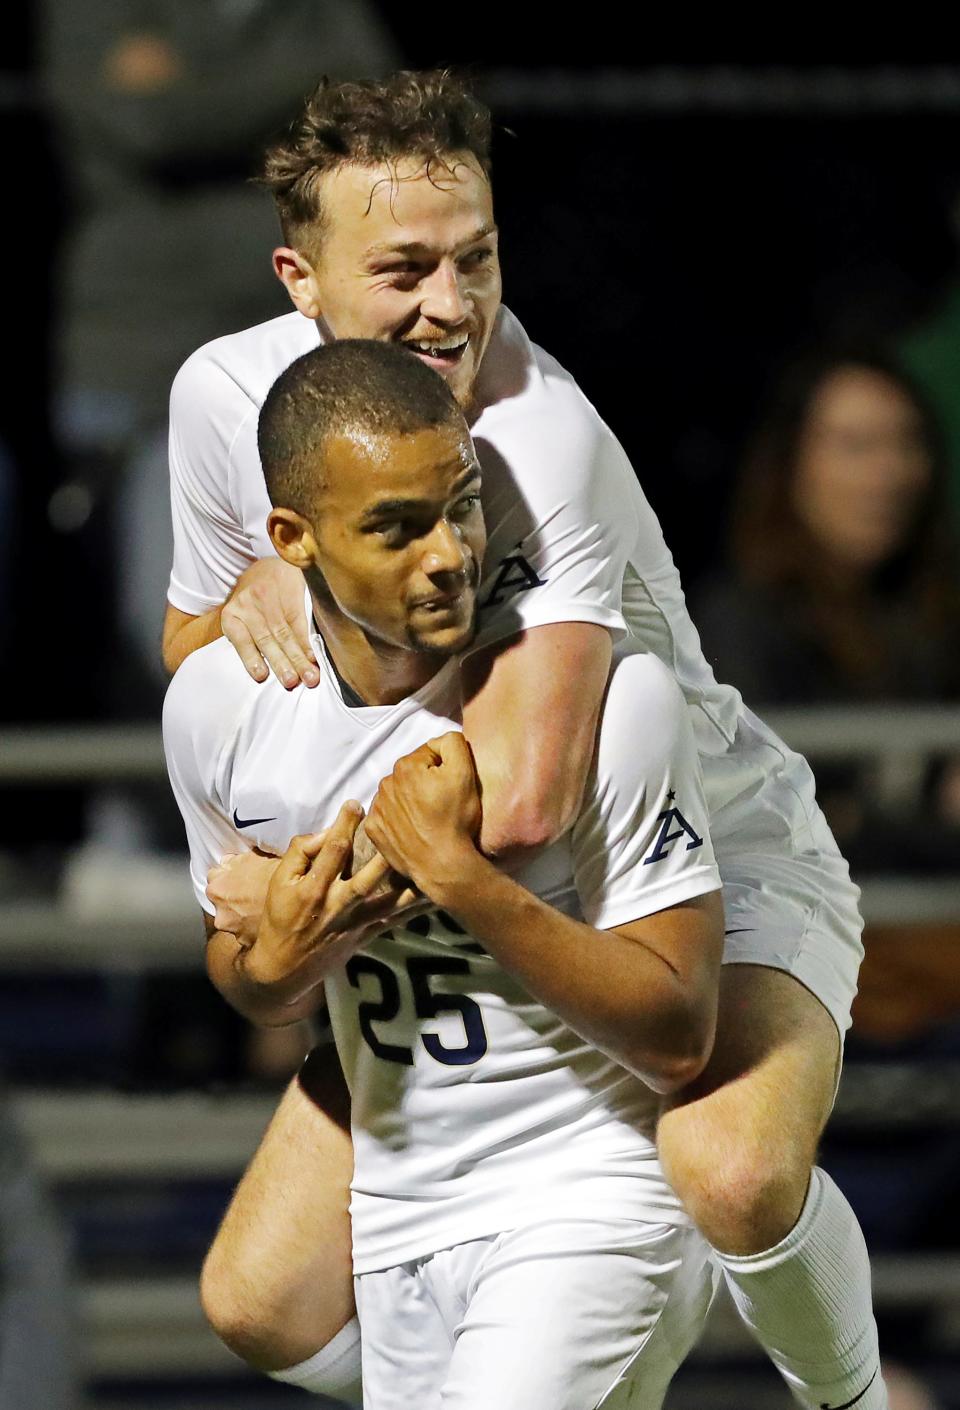 Akron midfielder Dyson Clapier (19) hops on the back of forward Terence Okoeguale (25) after his goal against Cleveland State during the first half of an NCAA college soccer game, Tuesday, Oct. 25, 2022, in Akron, Ohio.